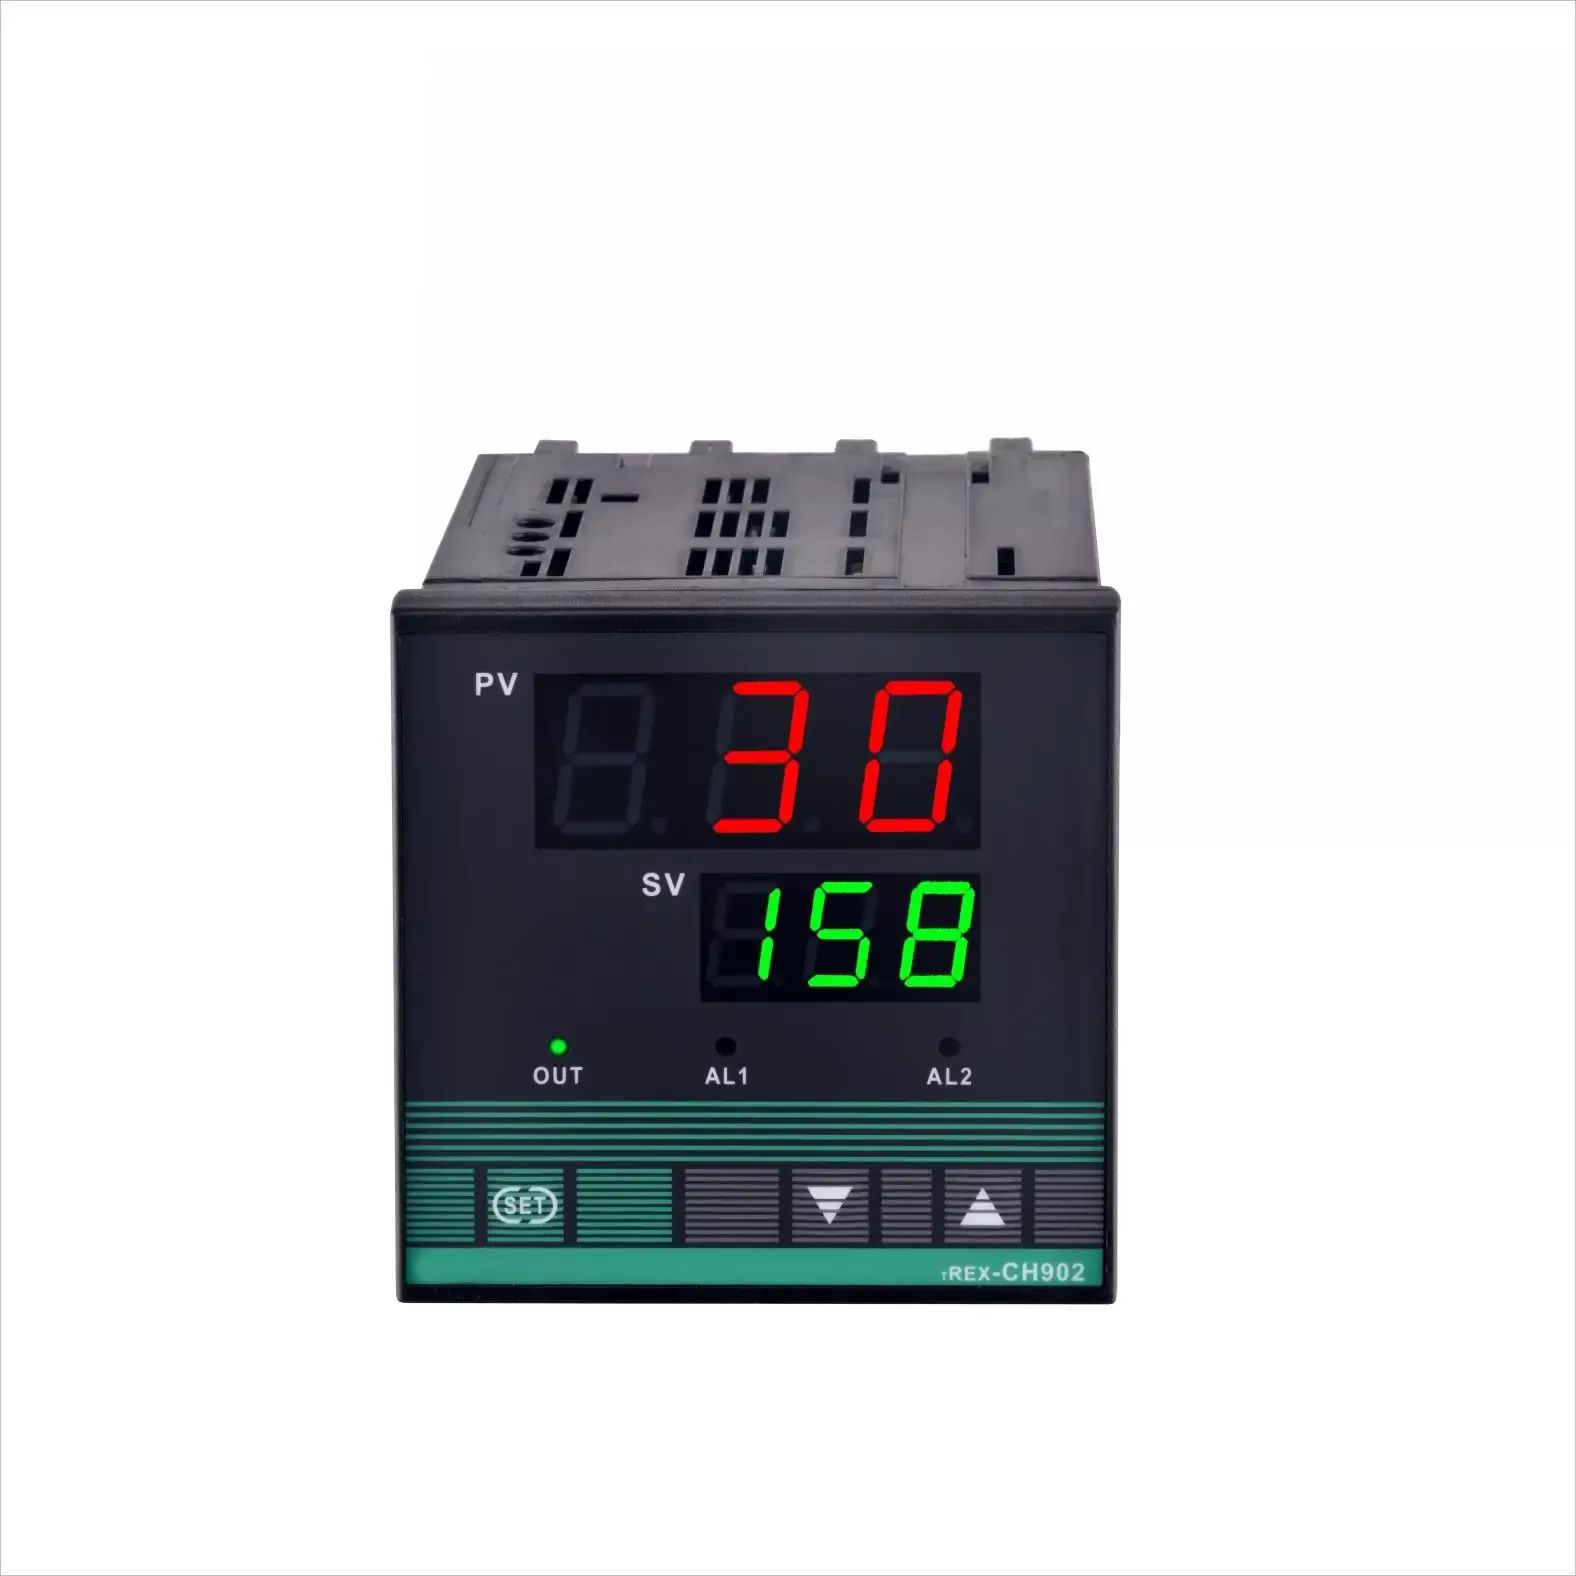 CH902 3 digit digital aiset pid ssr temperature controller for Packaging Machinery